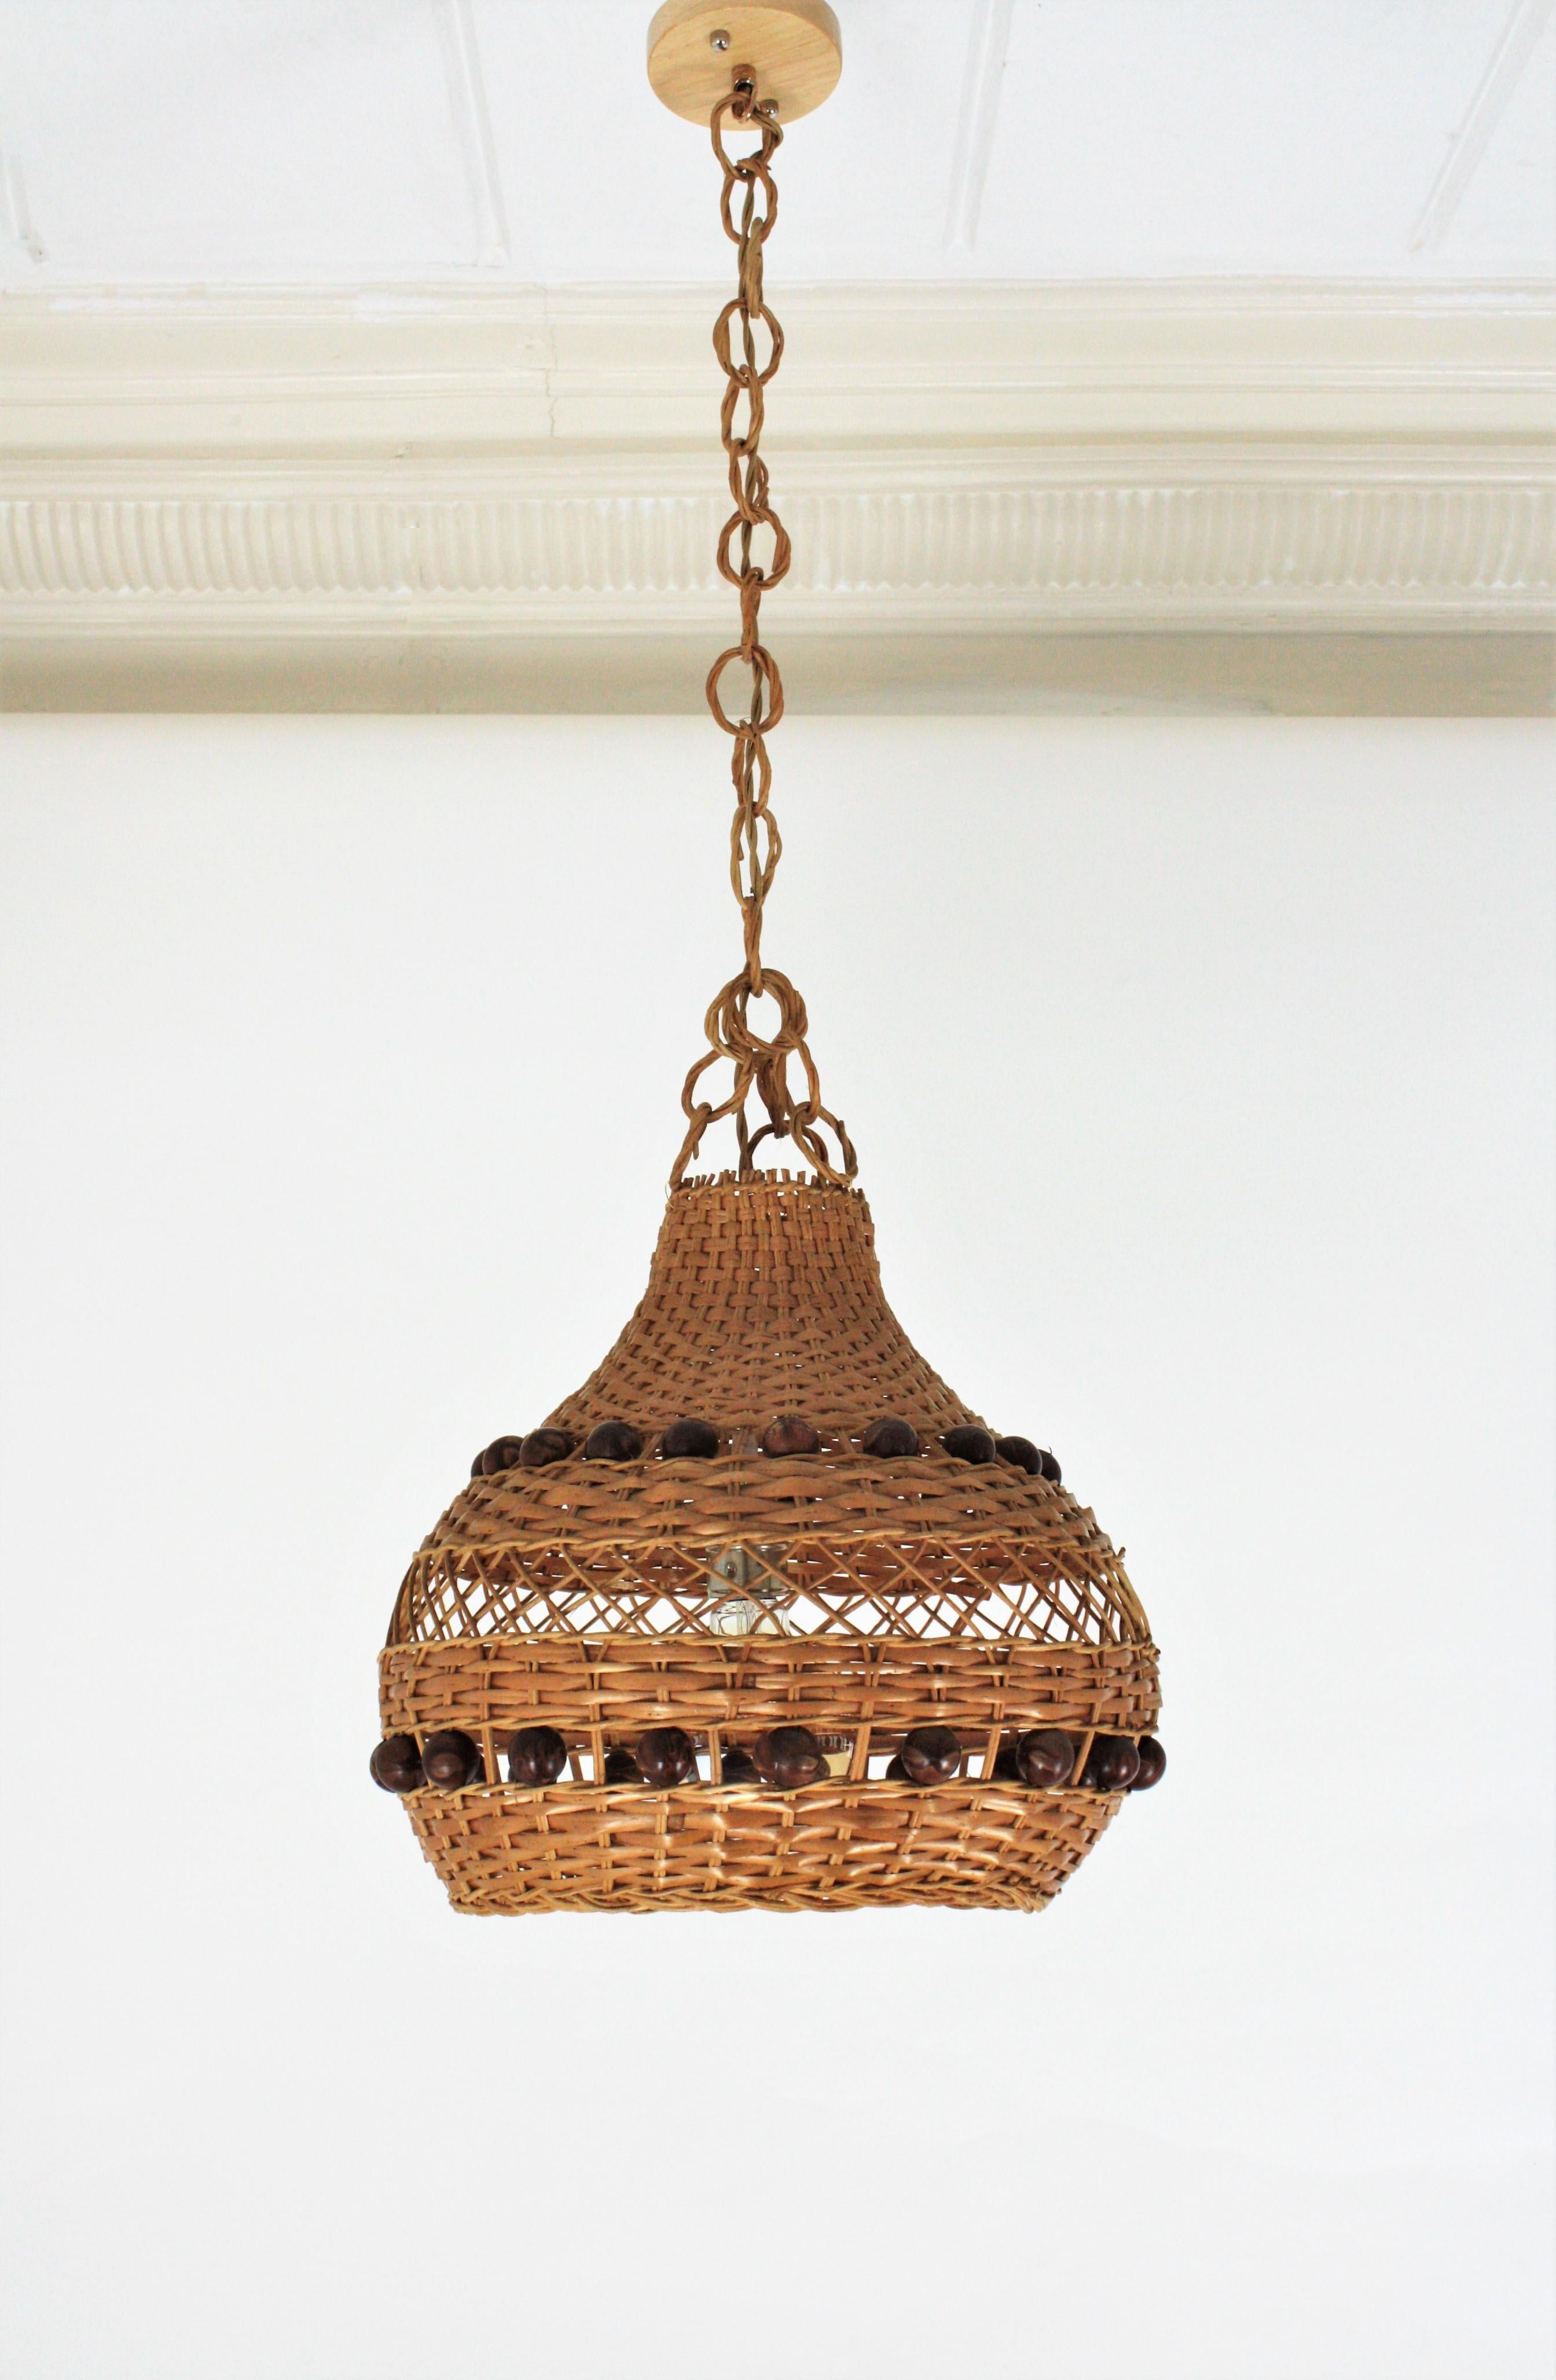 Spanish Rattan Pendant Light / Lantern with Balls Accents For Sale 4